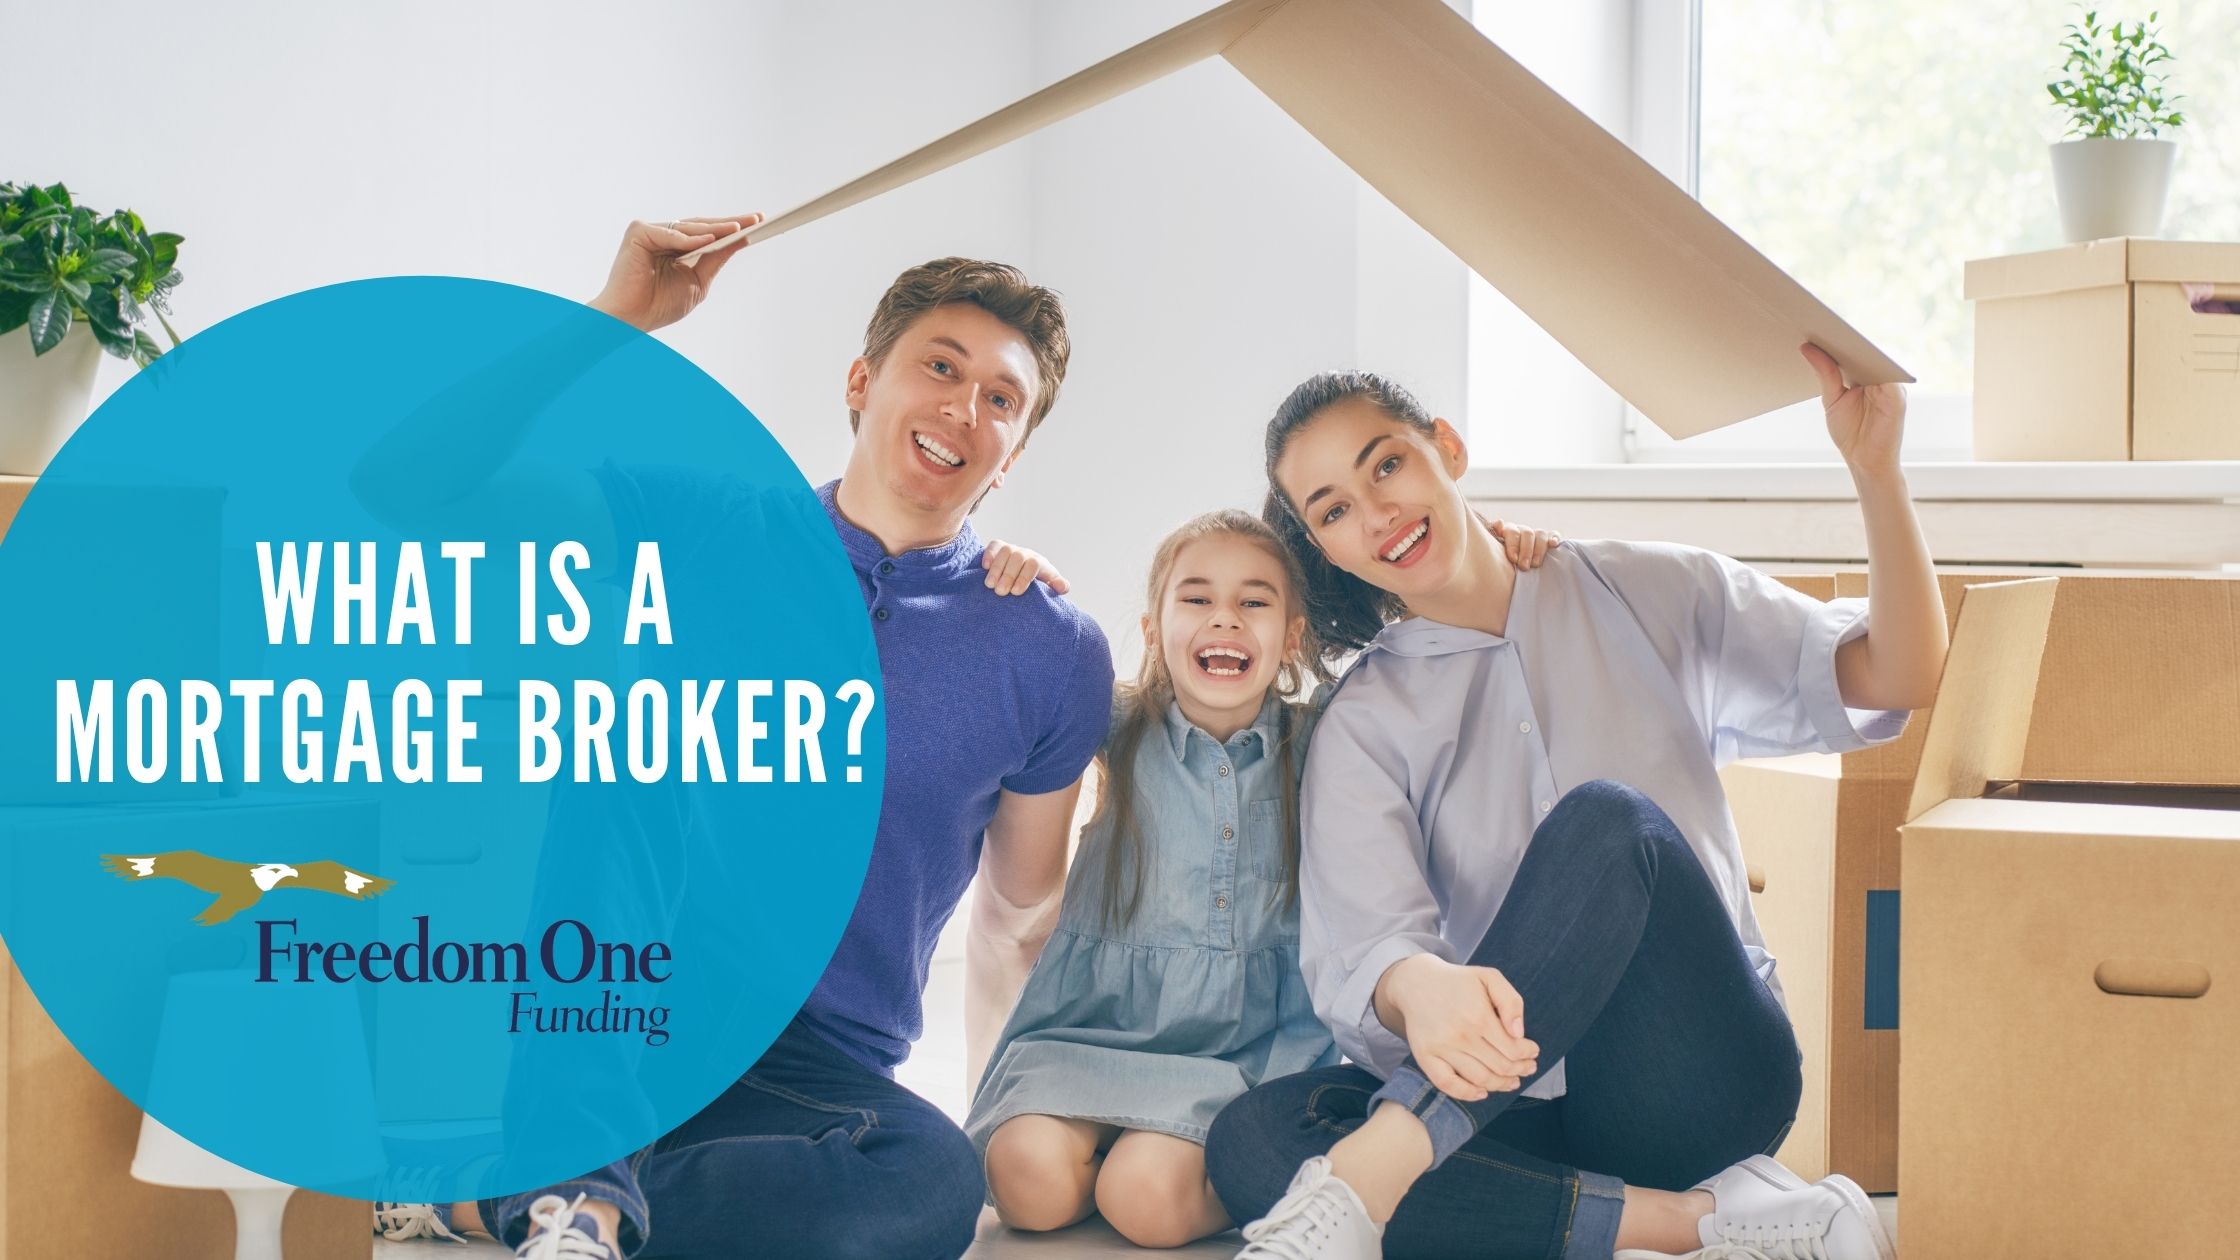 What is a mortgage broker